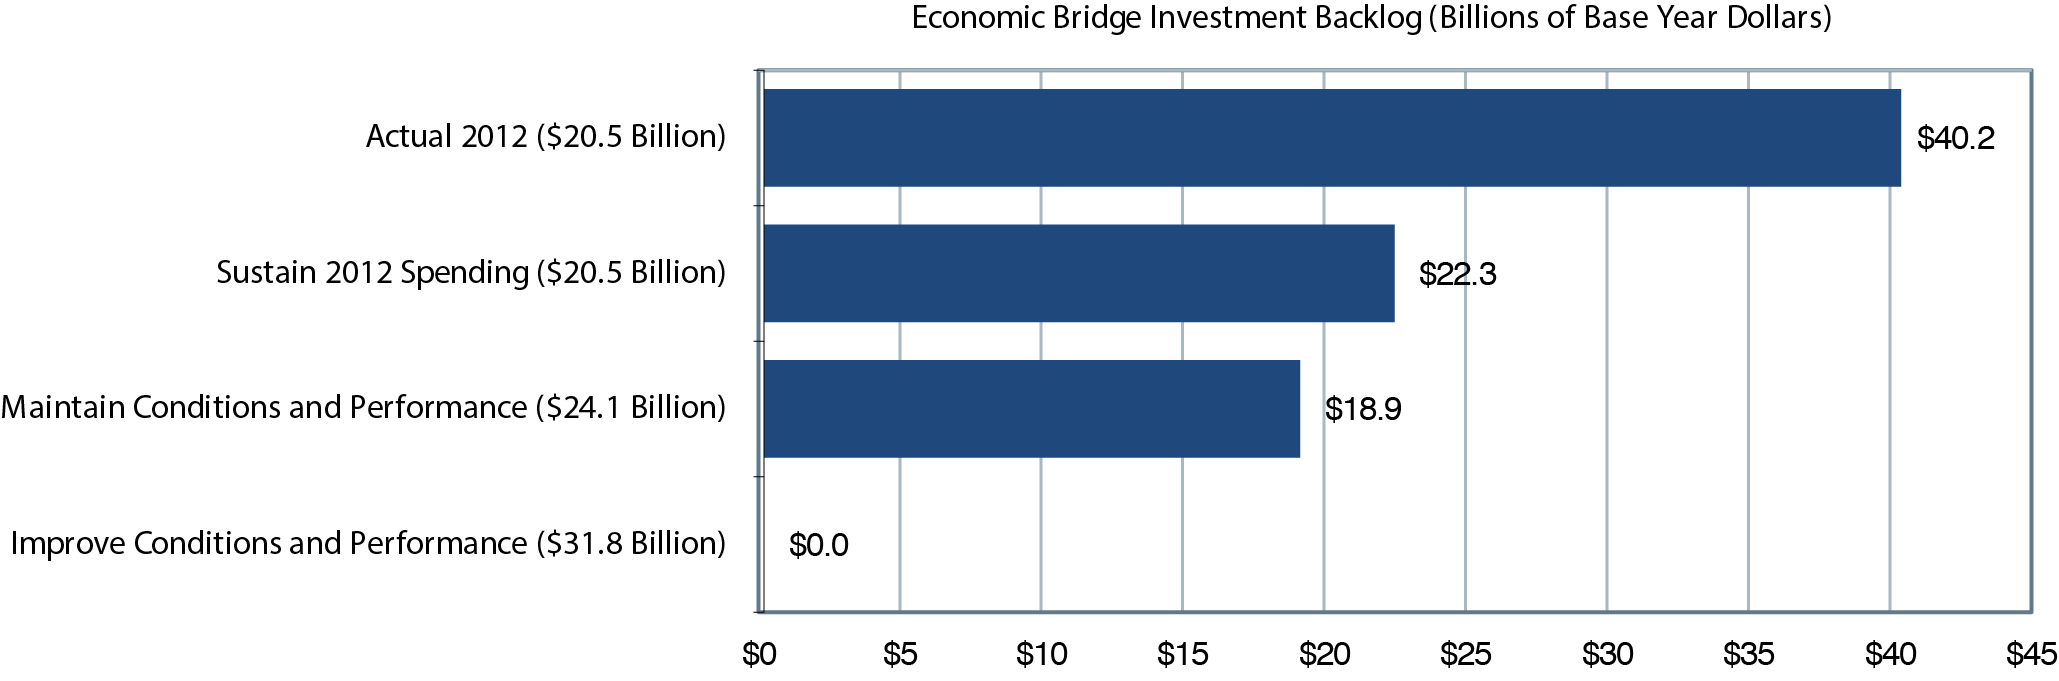 A horizontal bar chart plots economic bridge investment backlog in billions of base year dollars for selected scenarios. For Actual 2012, economic bridge investment backlog is $40.2 billion base year dollars. For Sustain 2012 Spending, economic bridge investment backlog is $22.3 billion base year dollars. For Maintain Conditions & Performance, economic bridge investment backlog is $18.9 billion base year dollars; the value for Improve Conditions & Performance is $0 billion base year dollars. <em>Sources: Highway Economic Requirements System and National Bridge Investment Analysis System.